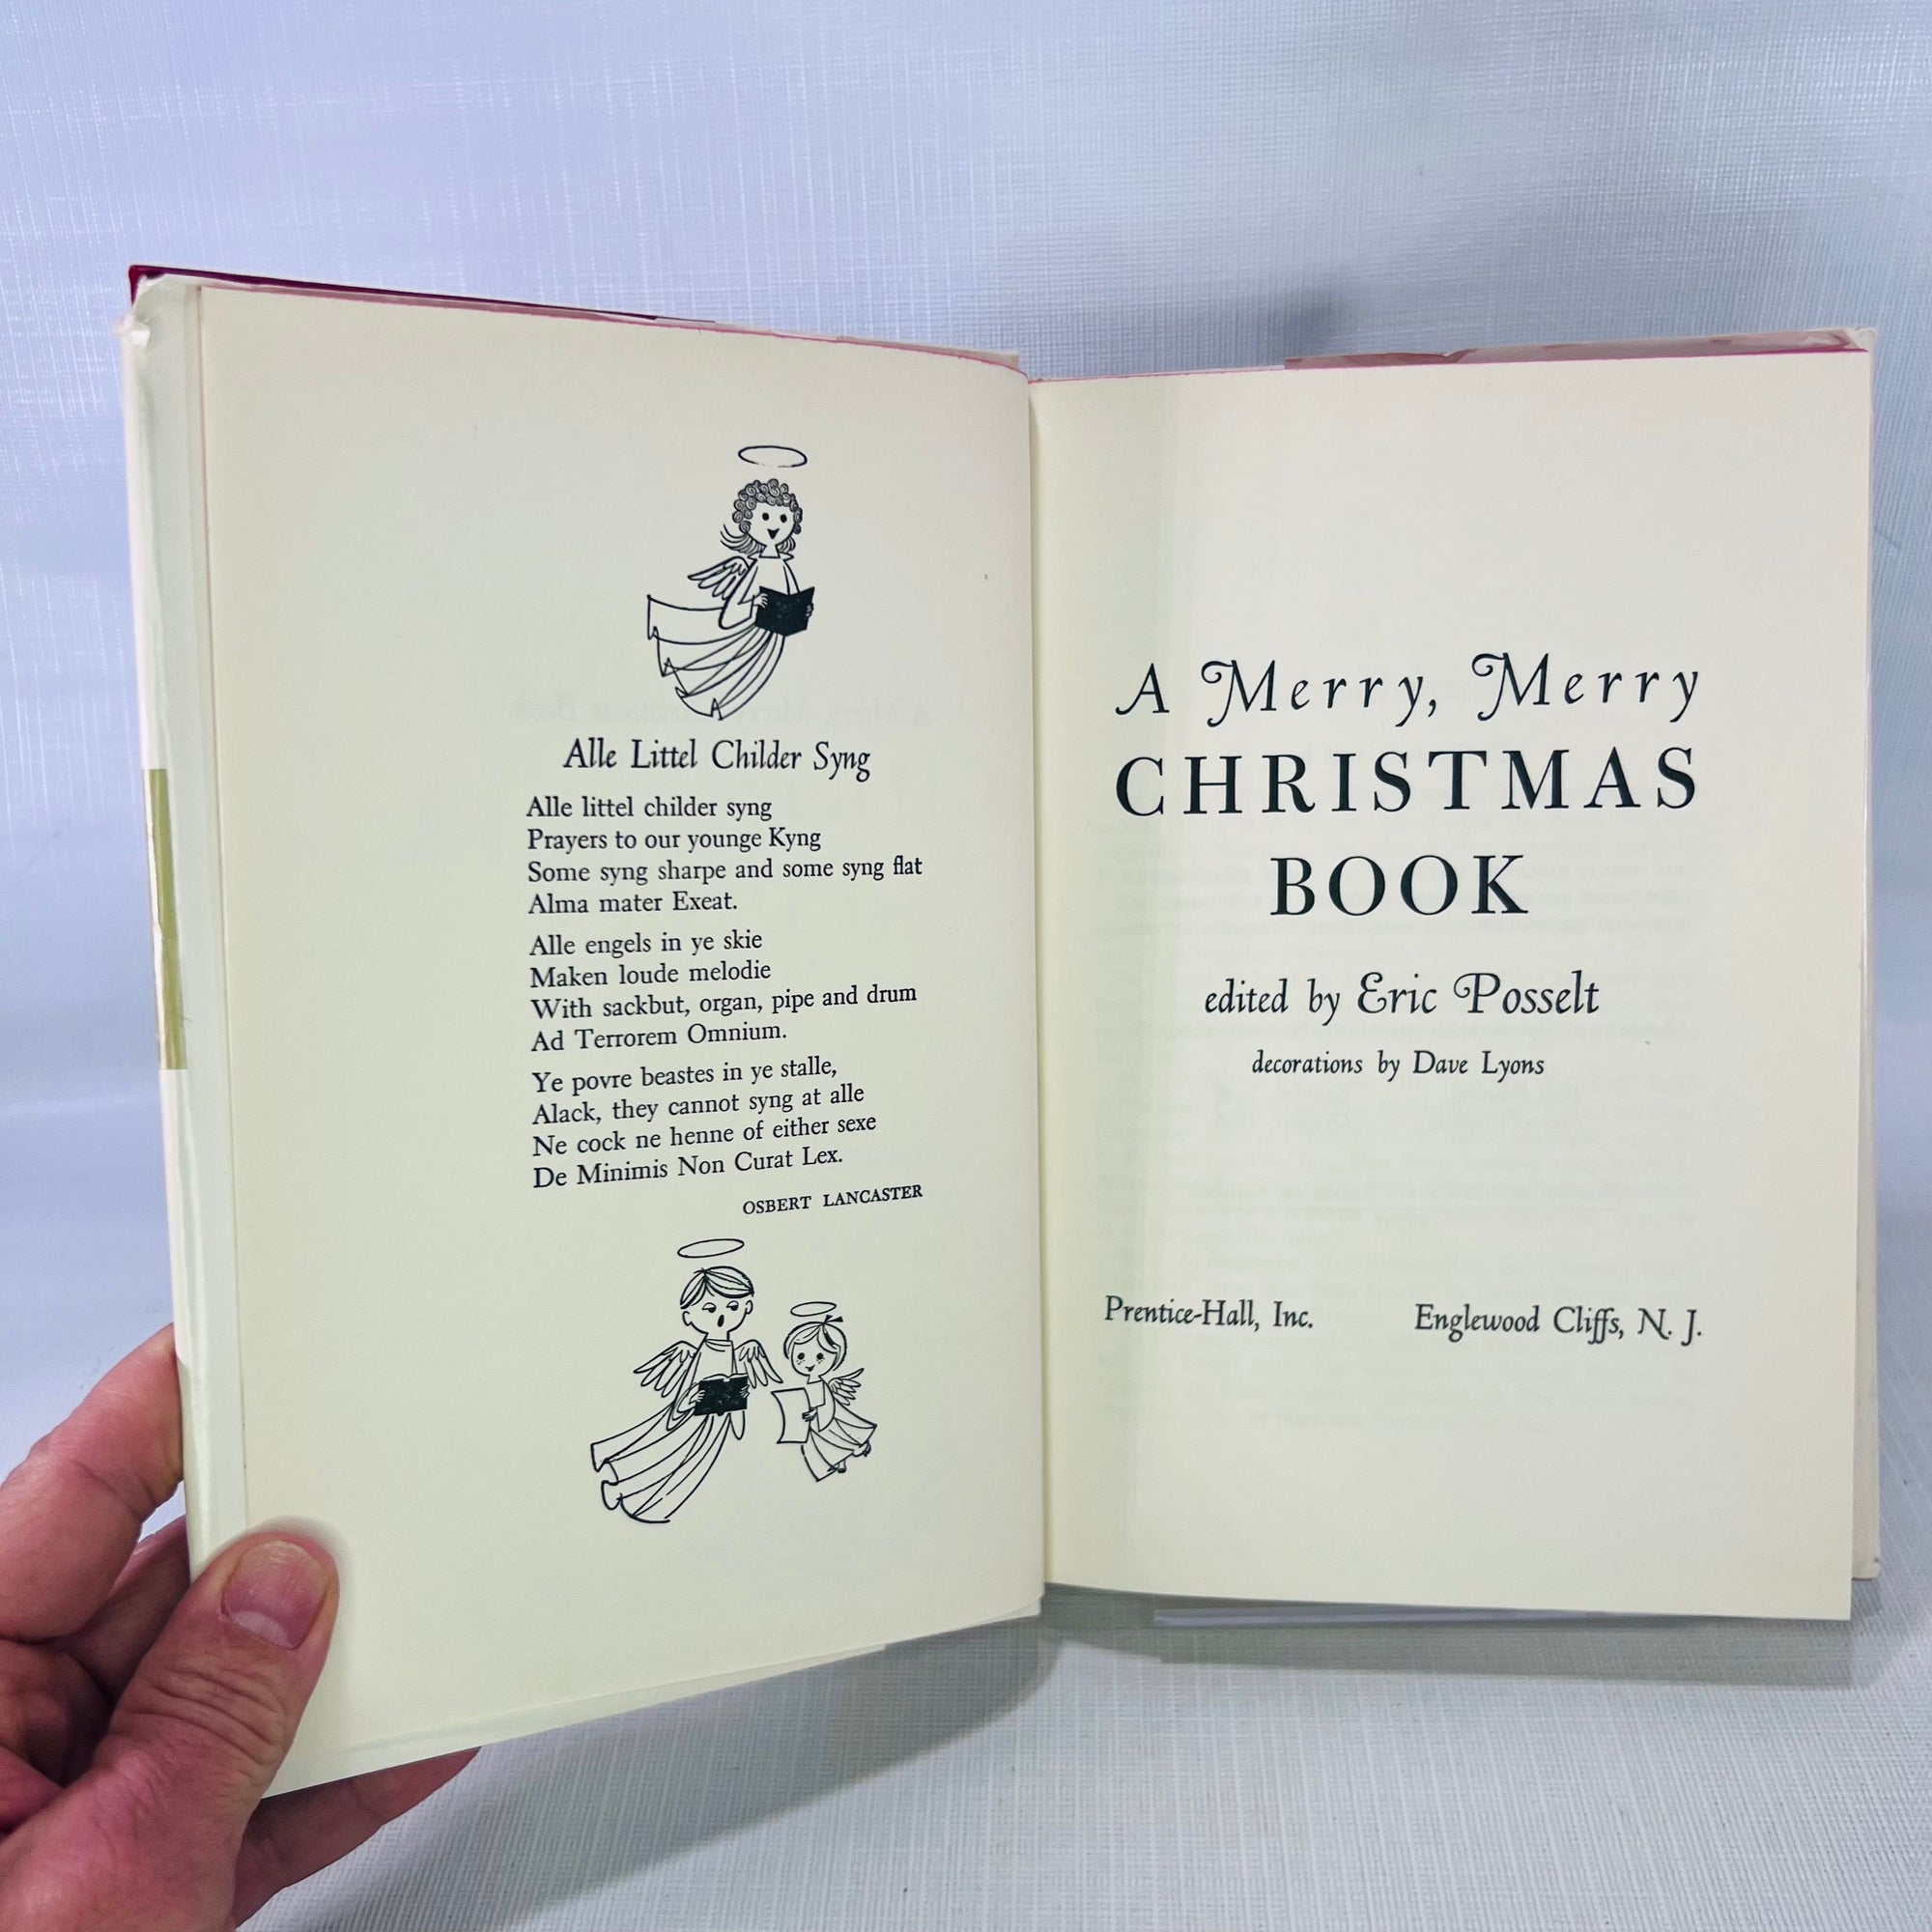 A Merry Merry Christmas Book Edited by Eric Posselt drawings by Dave Lyons 1956 Prentice-Hall Inc.